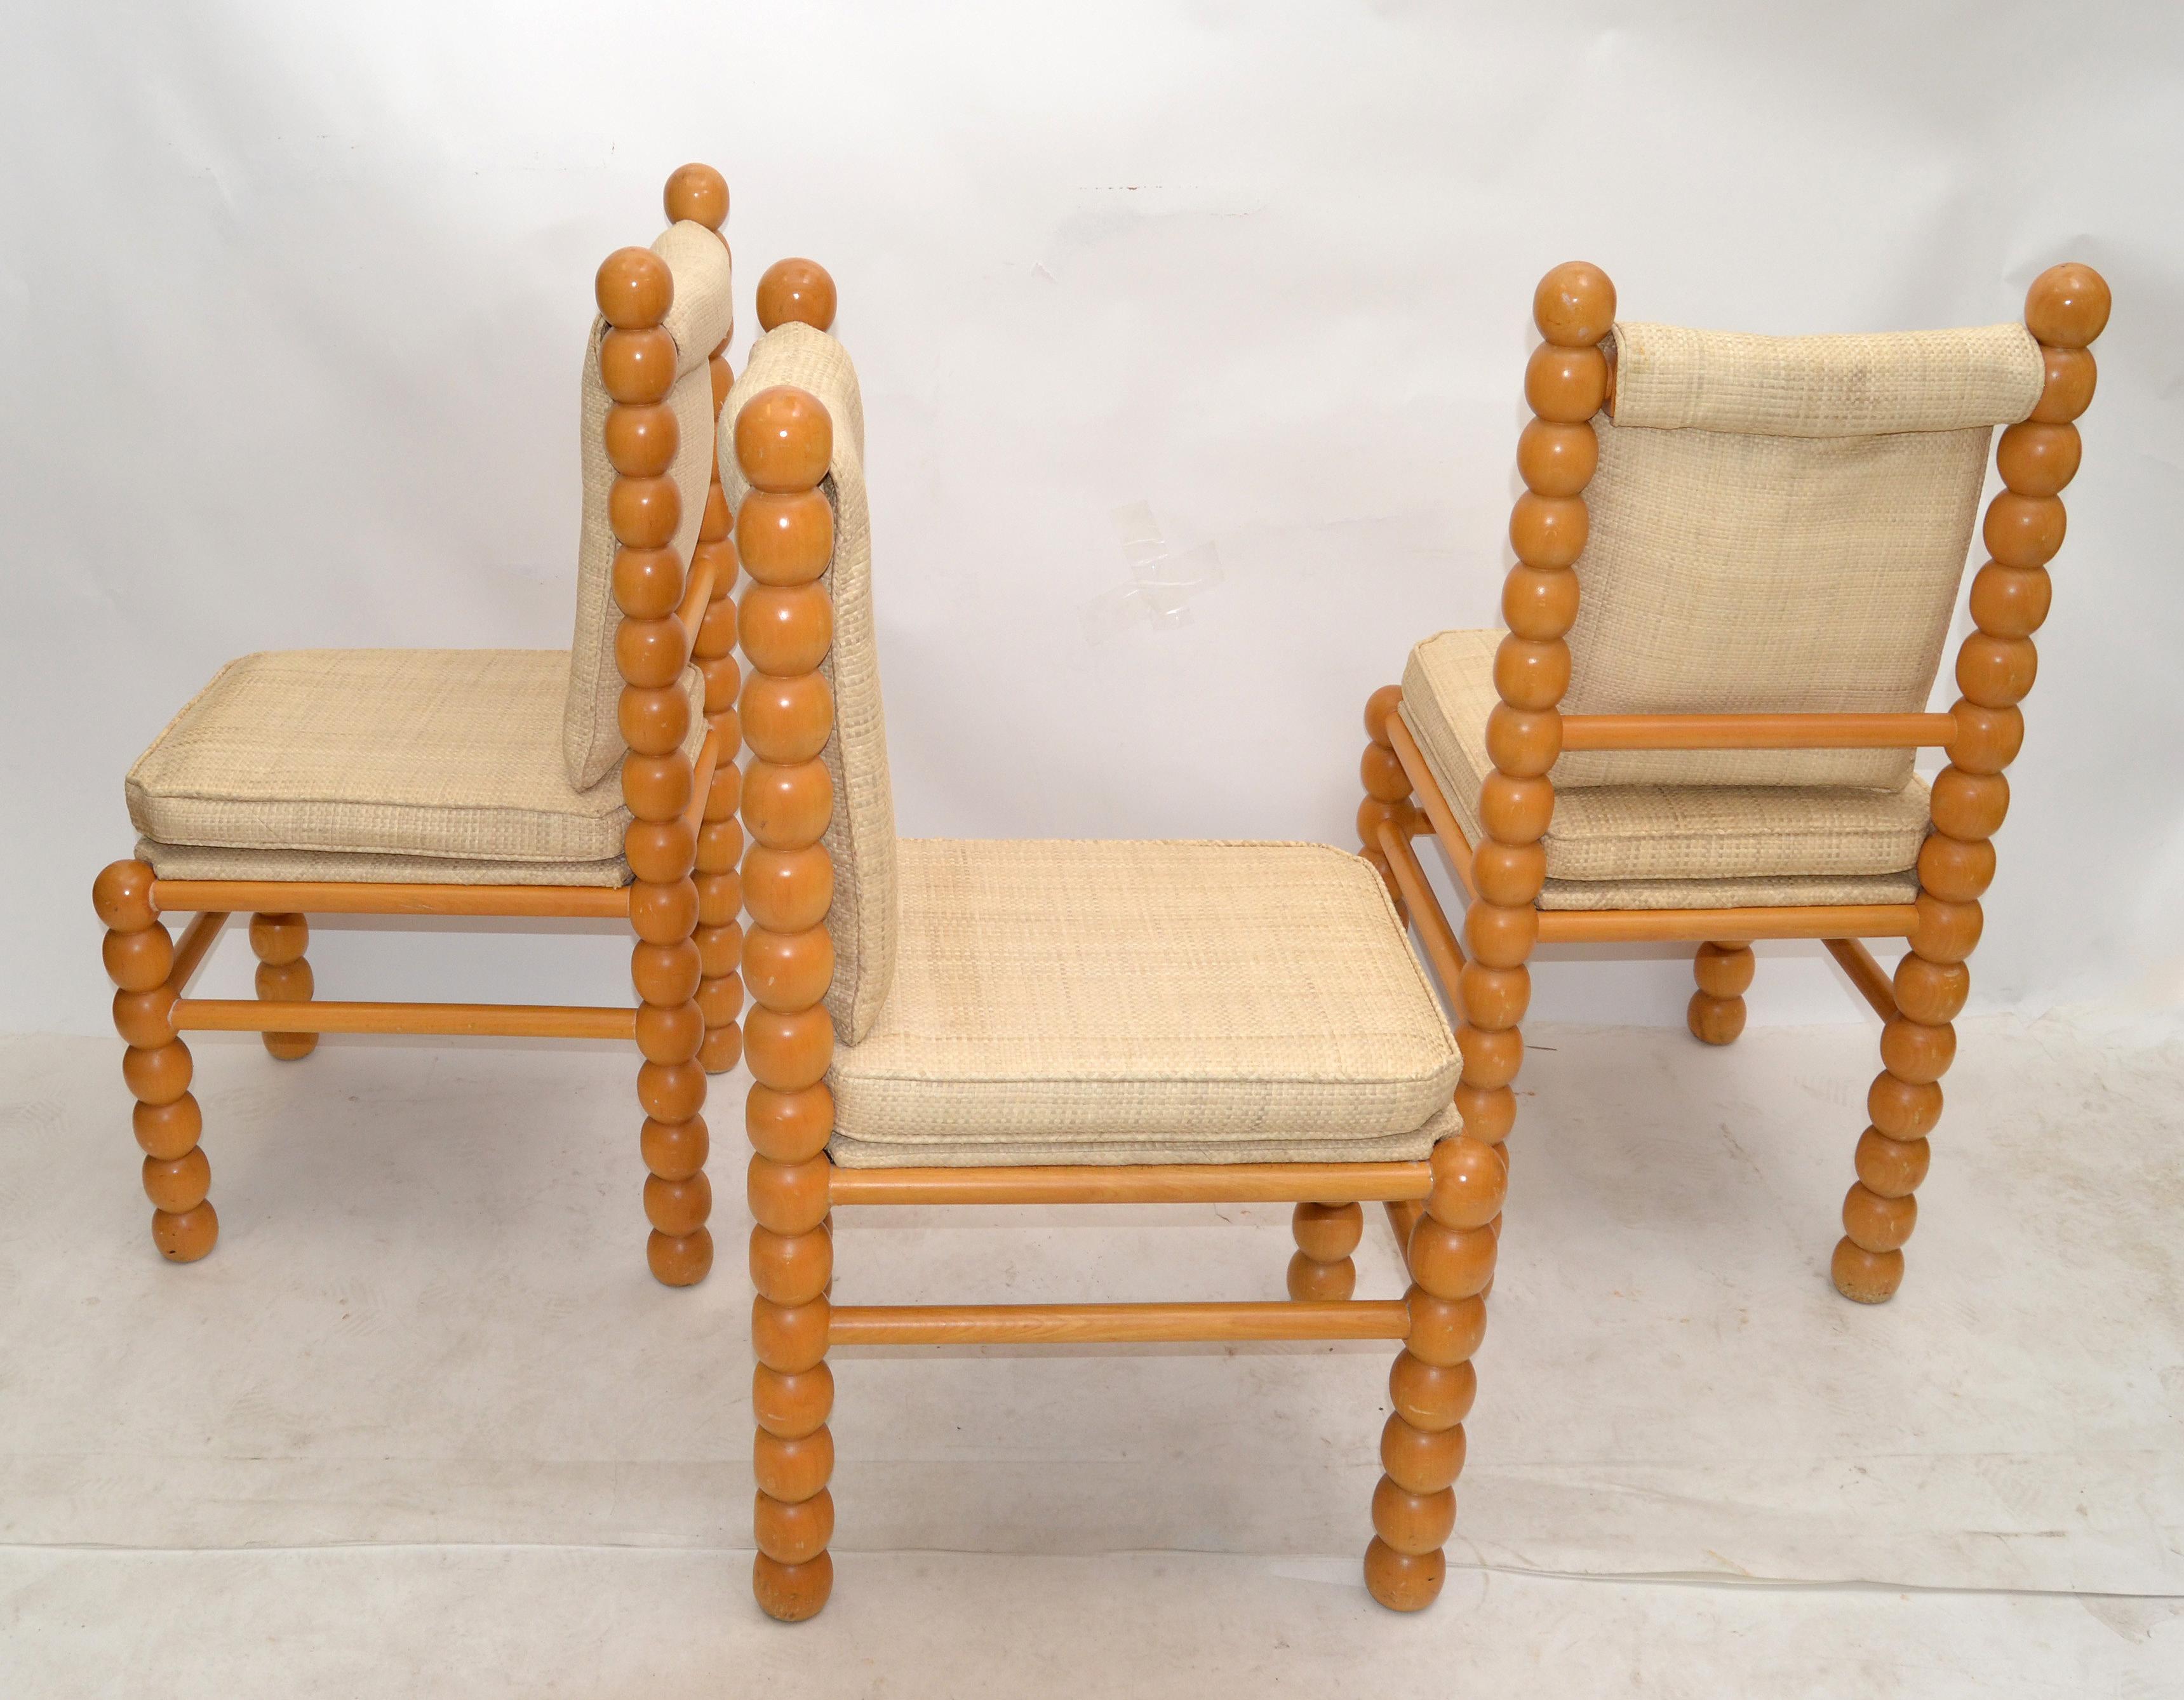 Foam Turned Birch Wood & Fabric Upholstery Dining Chair Mid-Century Modern, Set of 3 For Sale